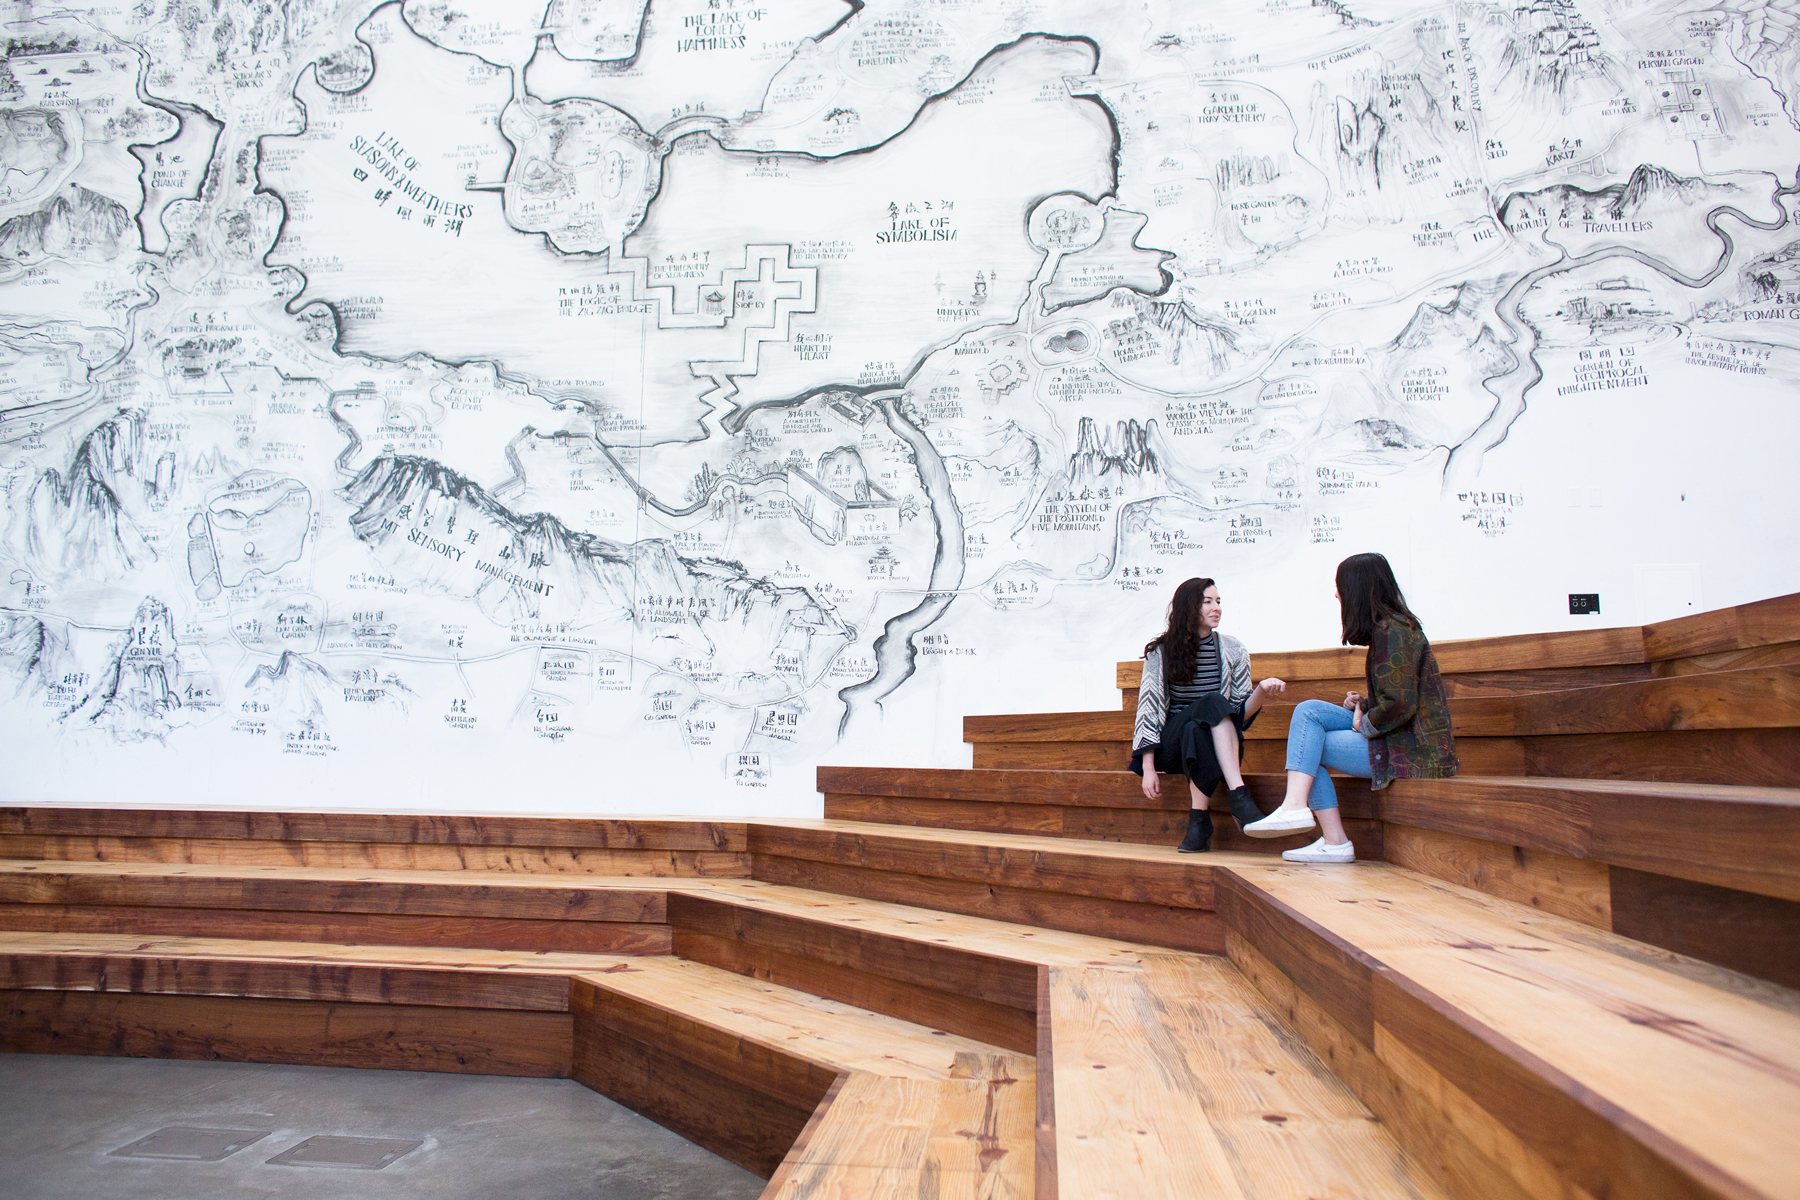 Two people in conversation sitting on wood steps in front of an indoor mural